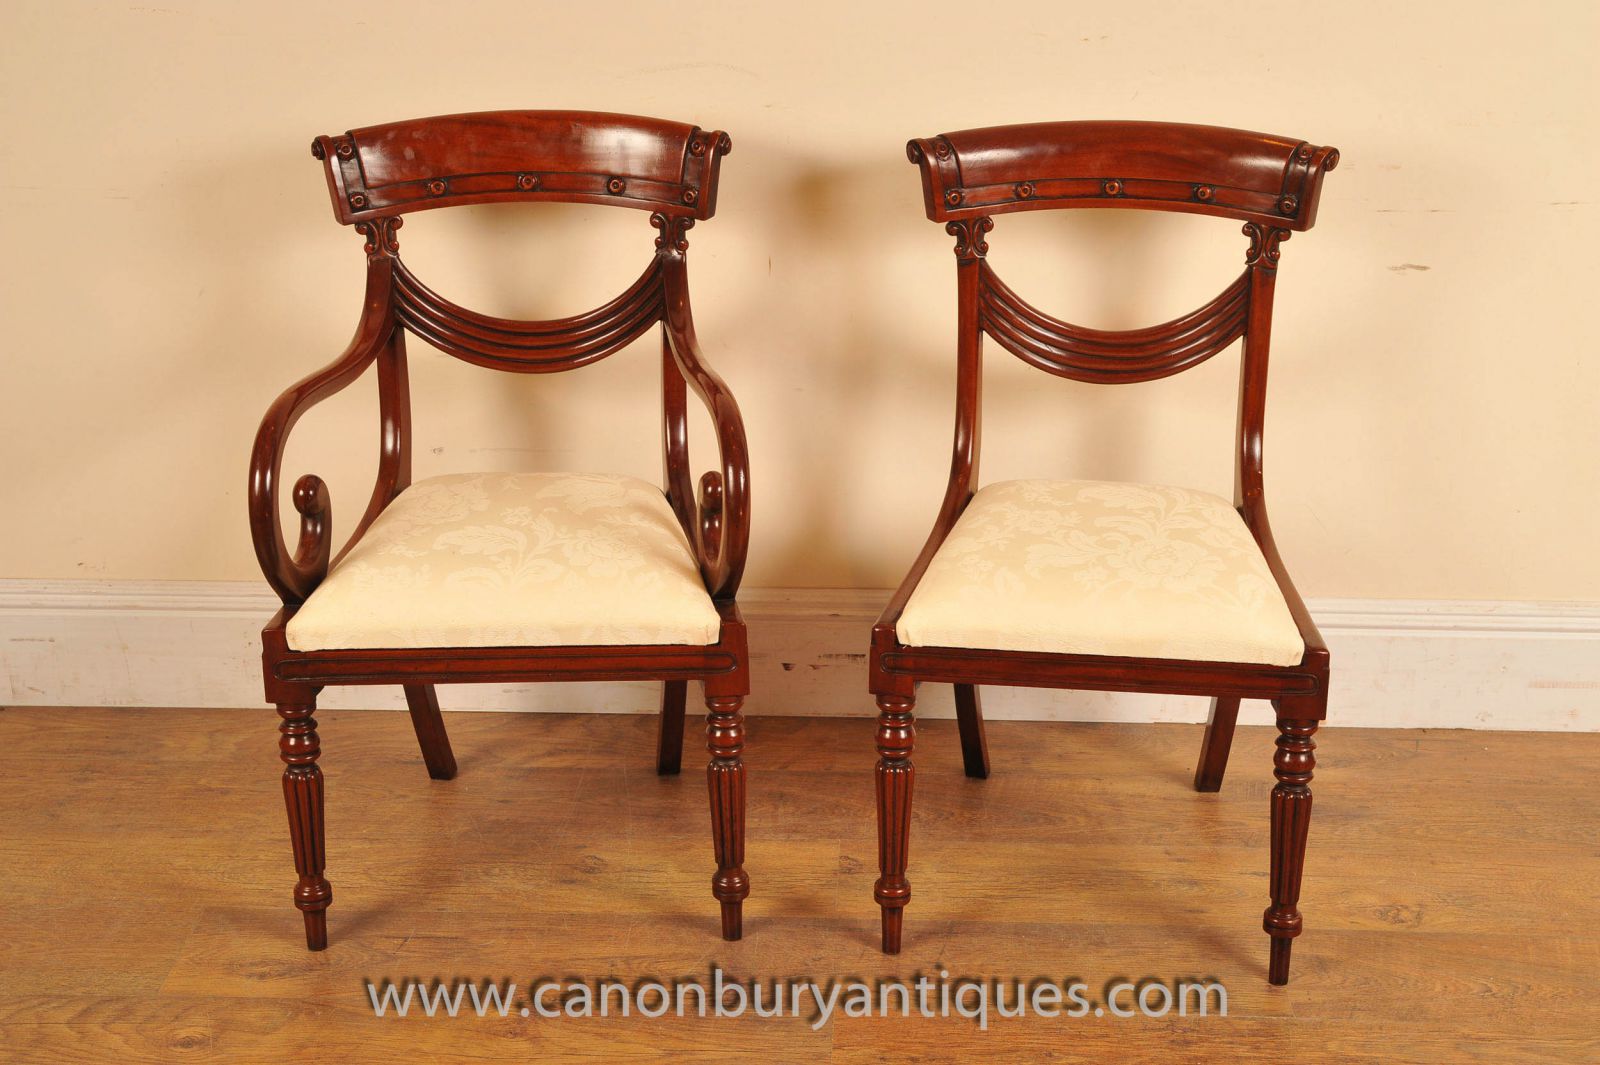 The classic Regency swag dining chair